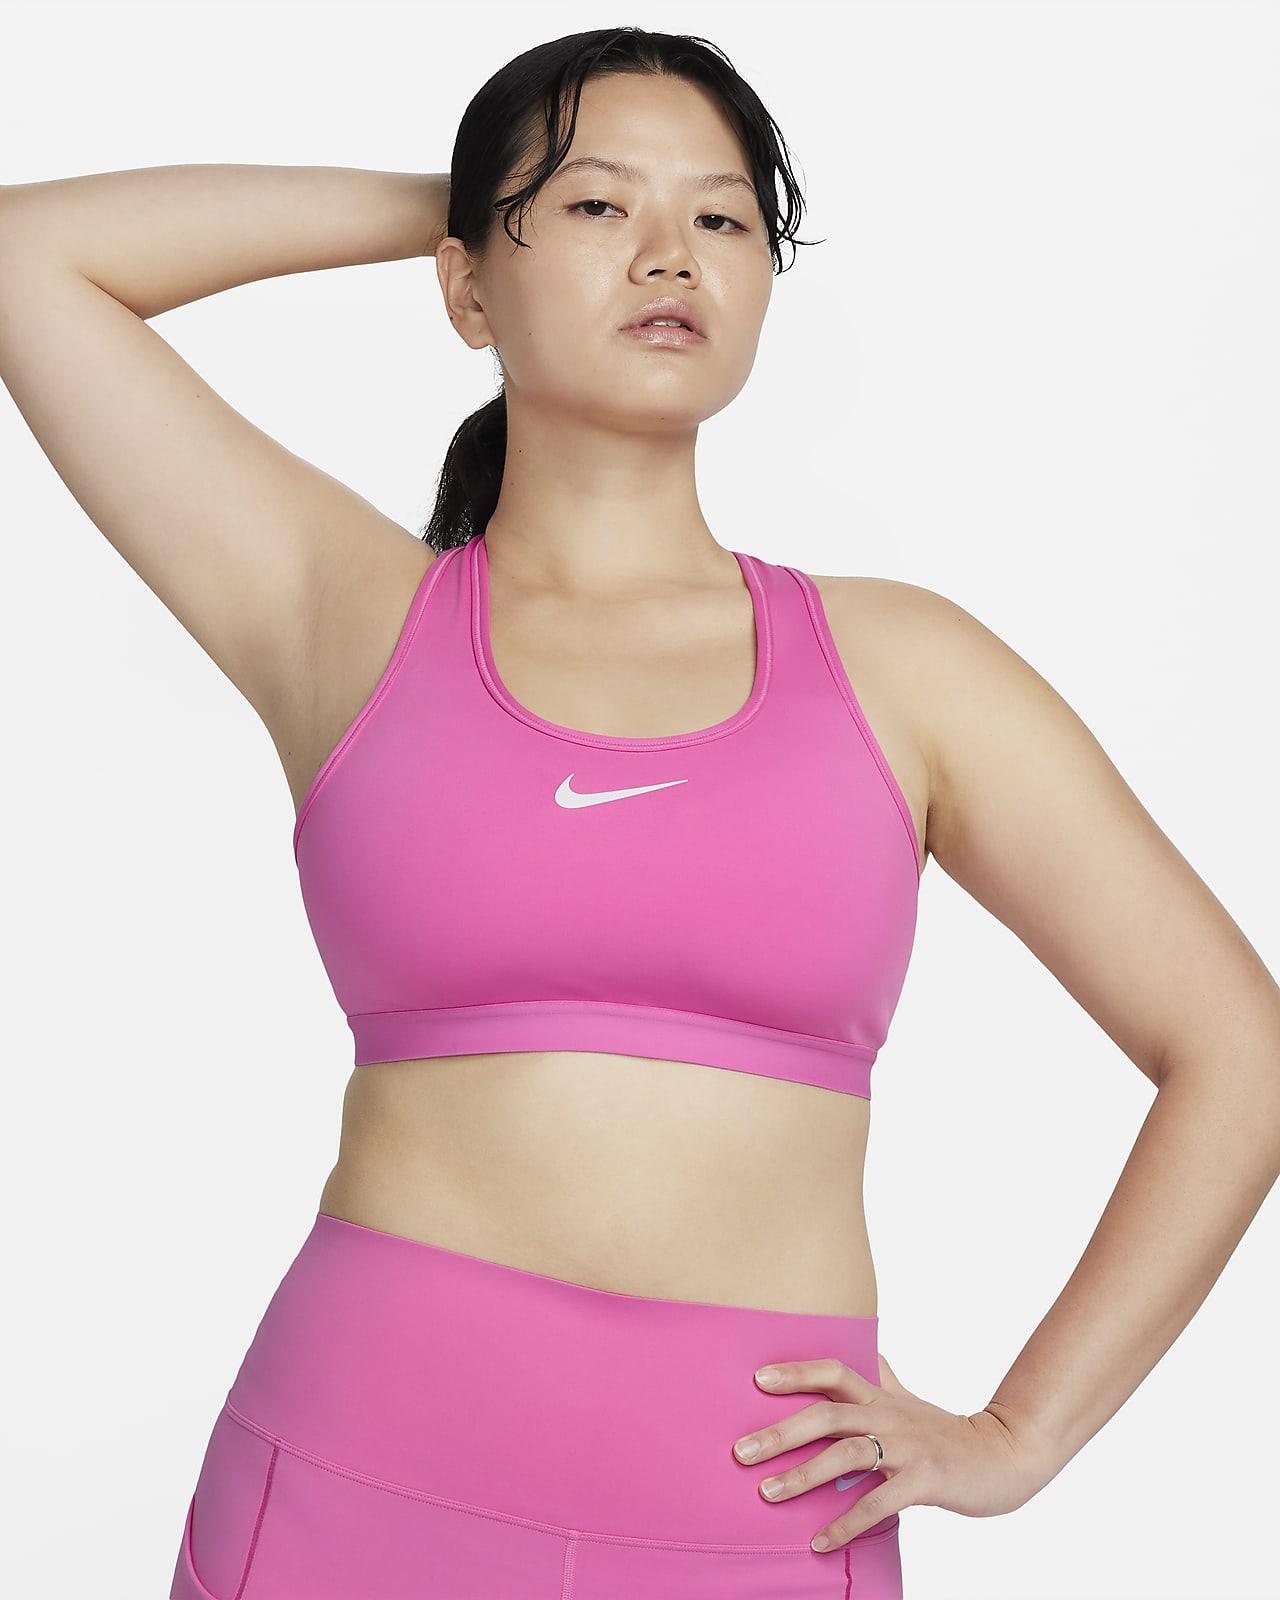 Nike Any Performance/Activity Sports Bras for Women